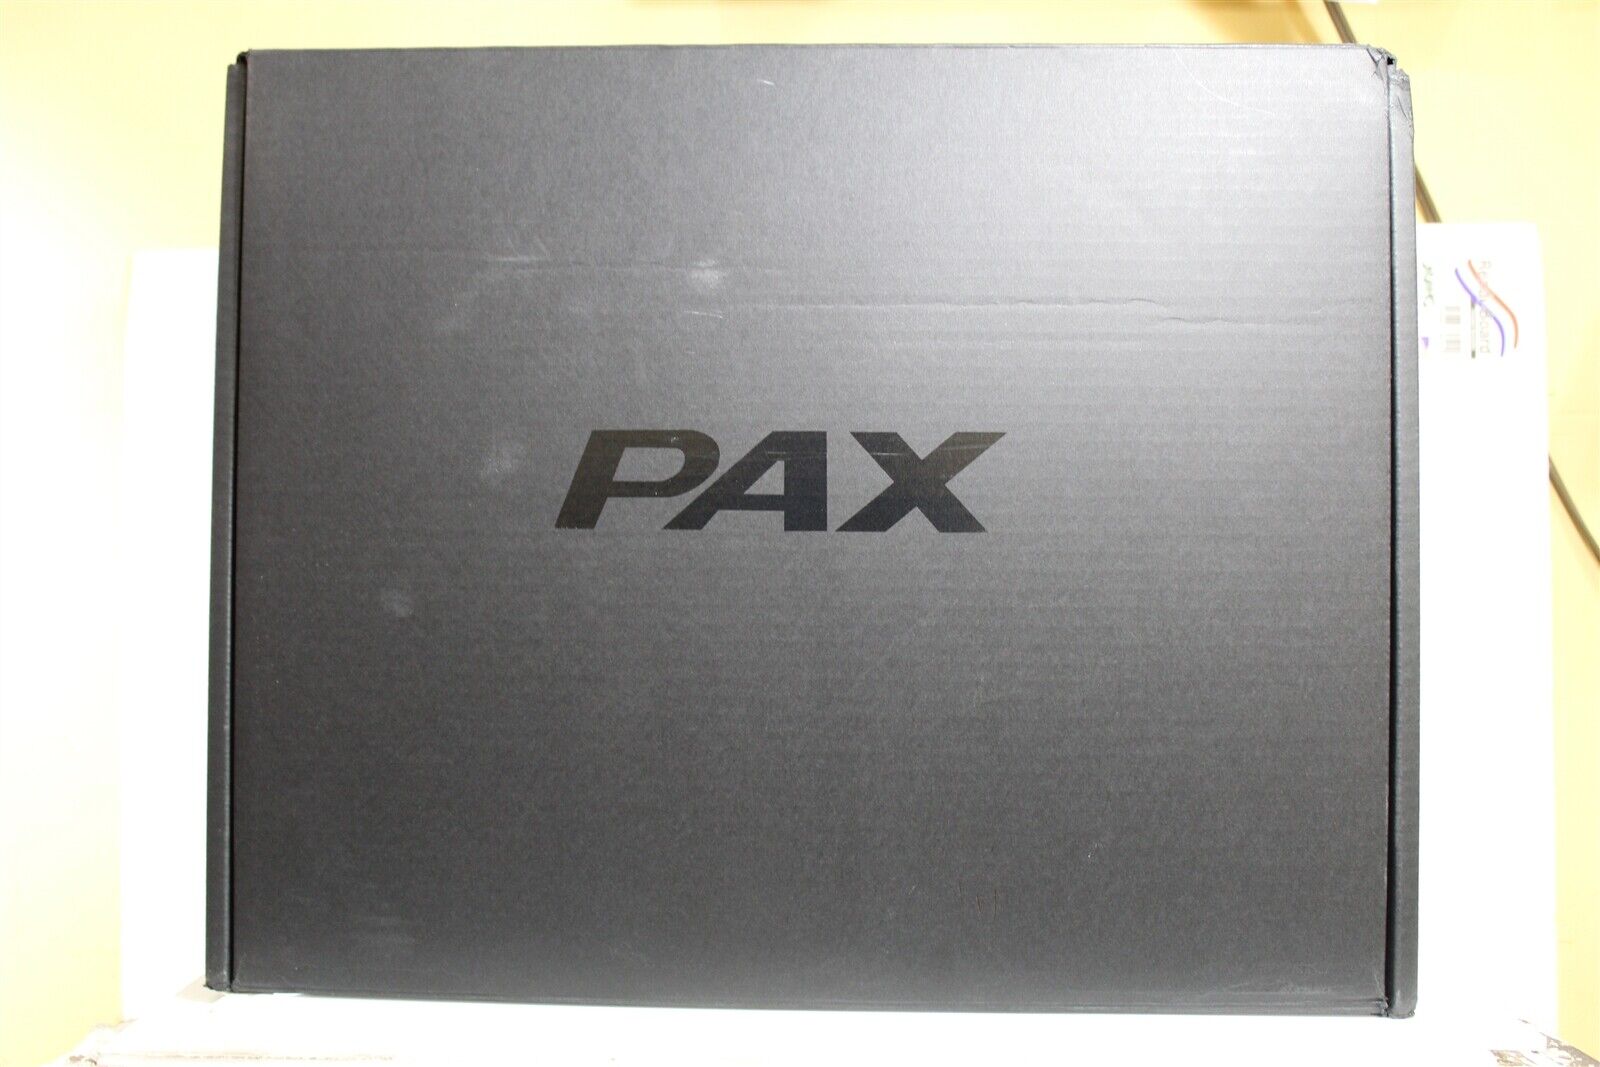 PAX TECHNOLOGY WORKSTATION COMPUTER L1400 - BRAND NEW-OPENED BOX-ANDROID TABLET 